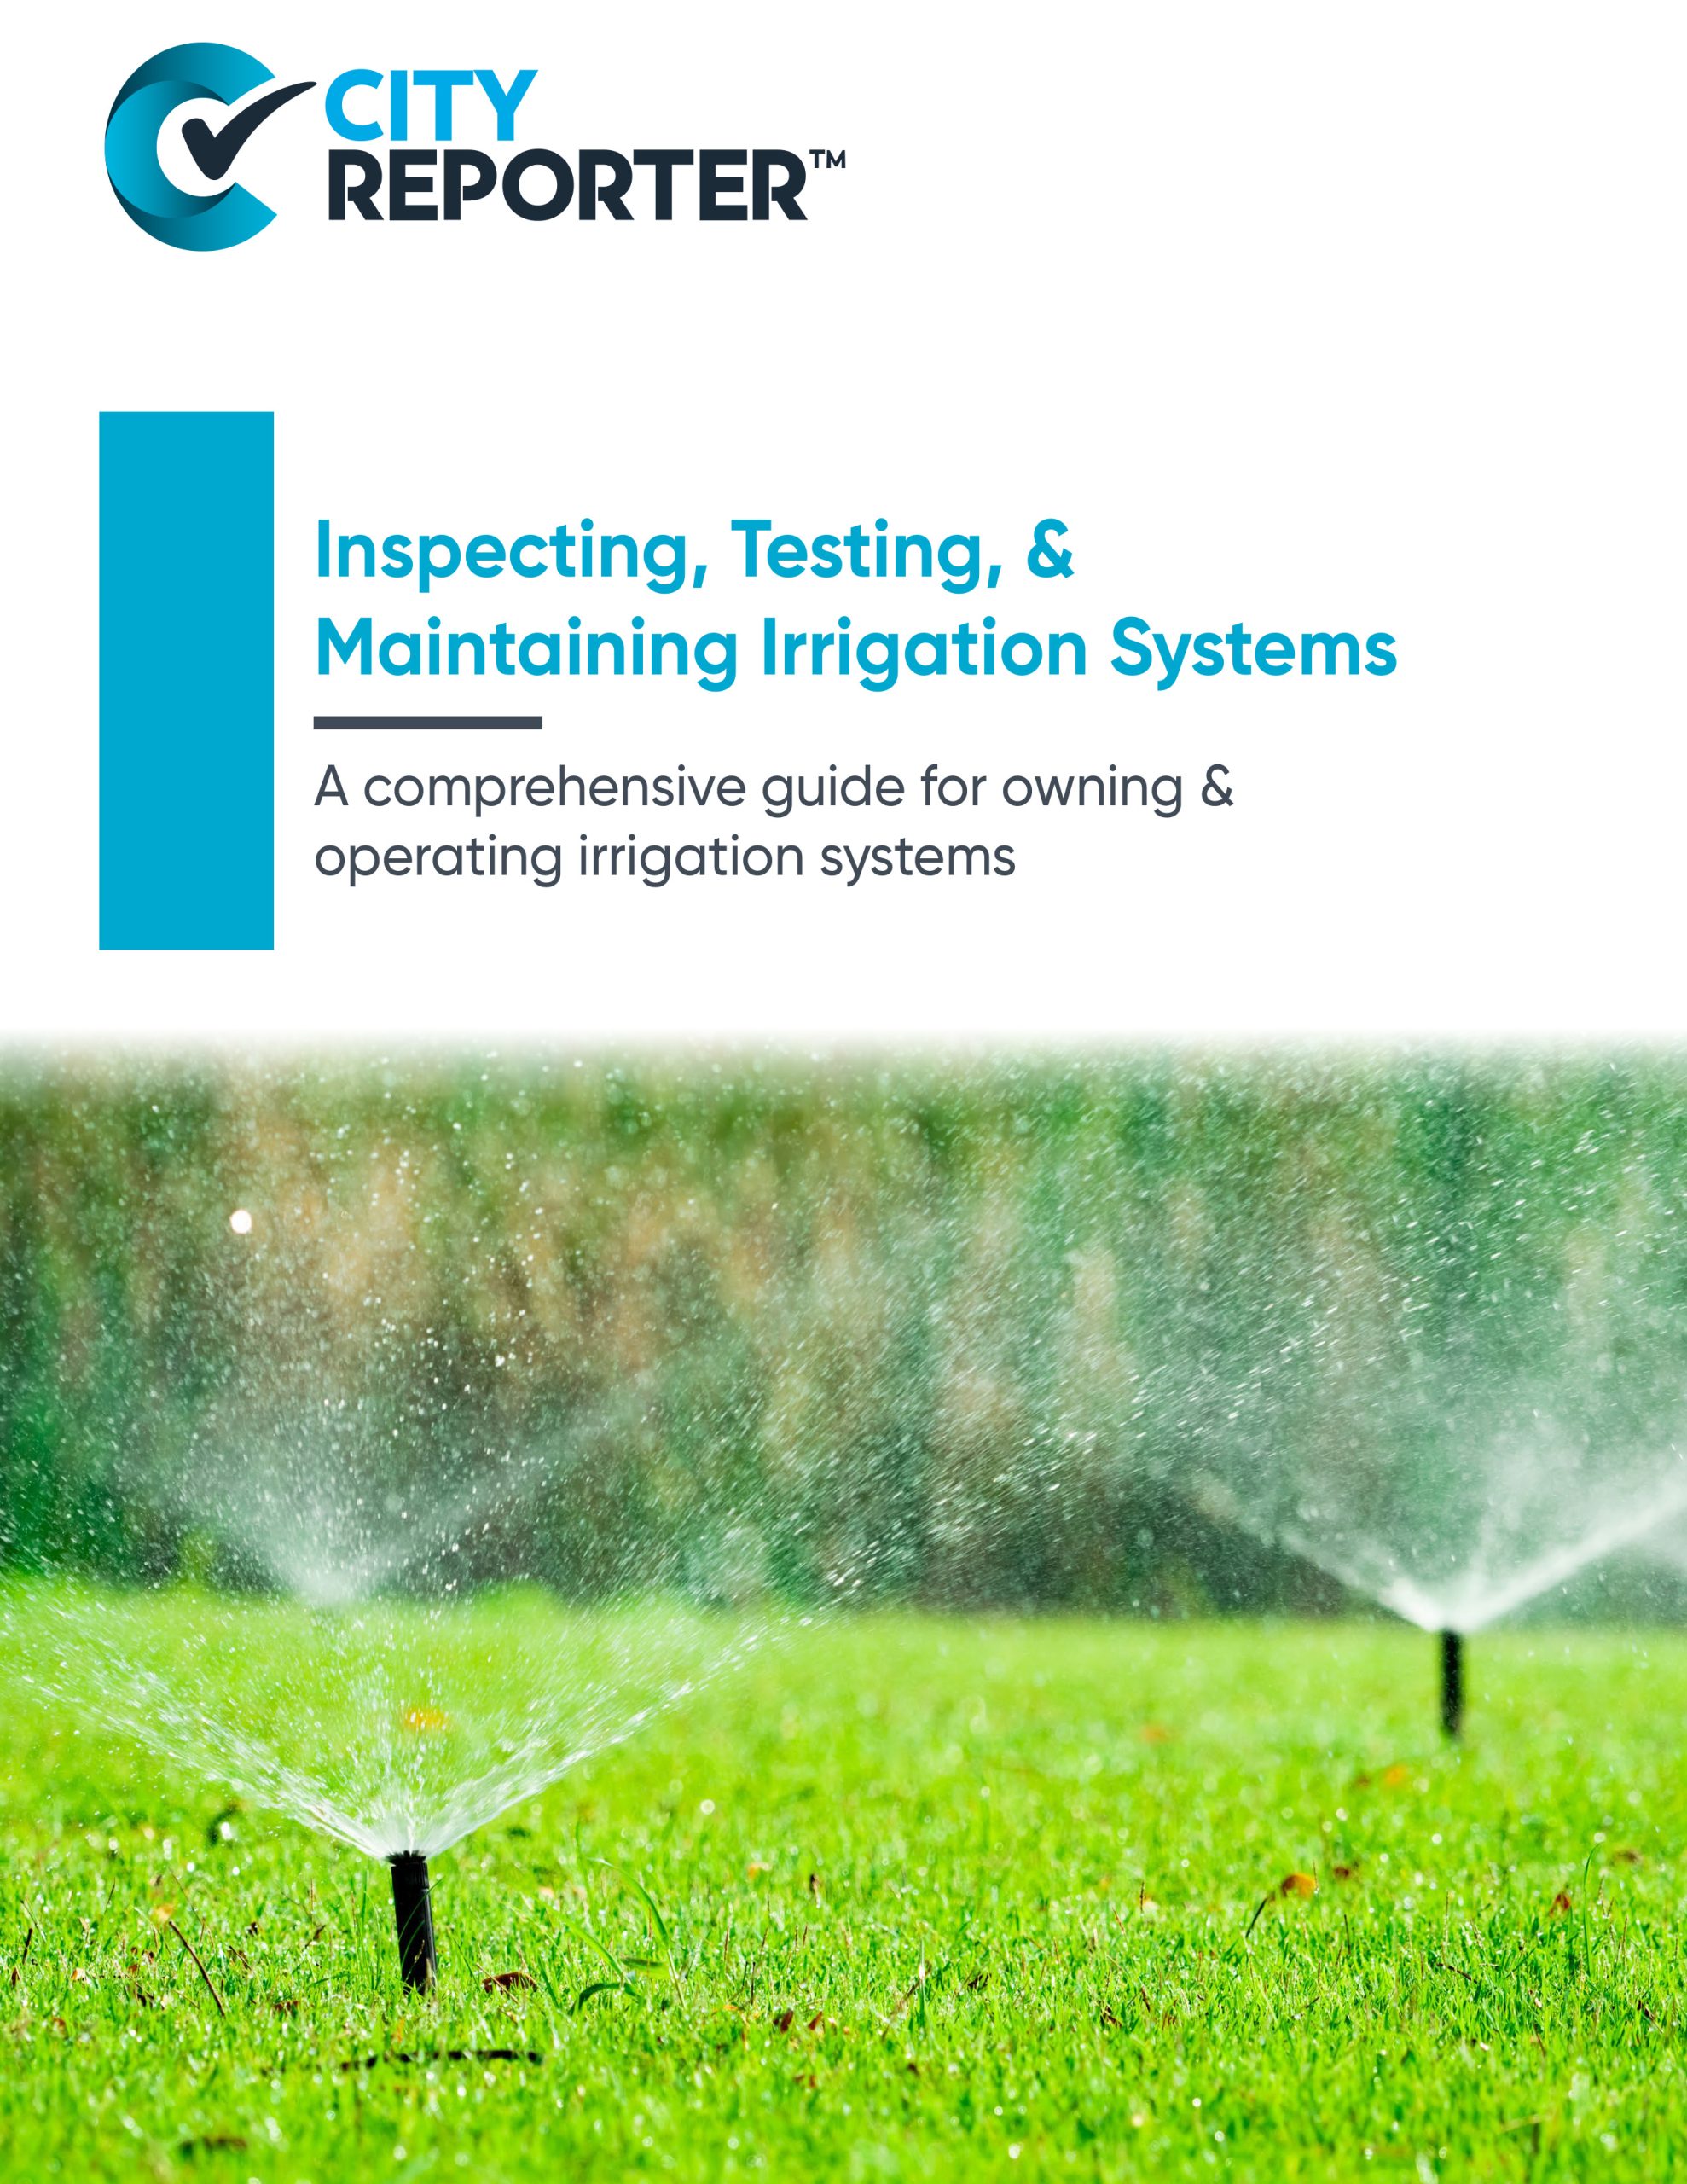 The first page of CityReporter's document - Inspecting, Testing, and Maintaining Irrigation systems